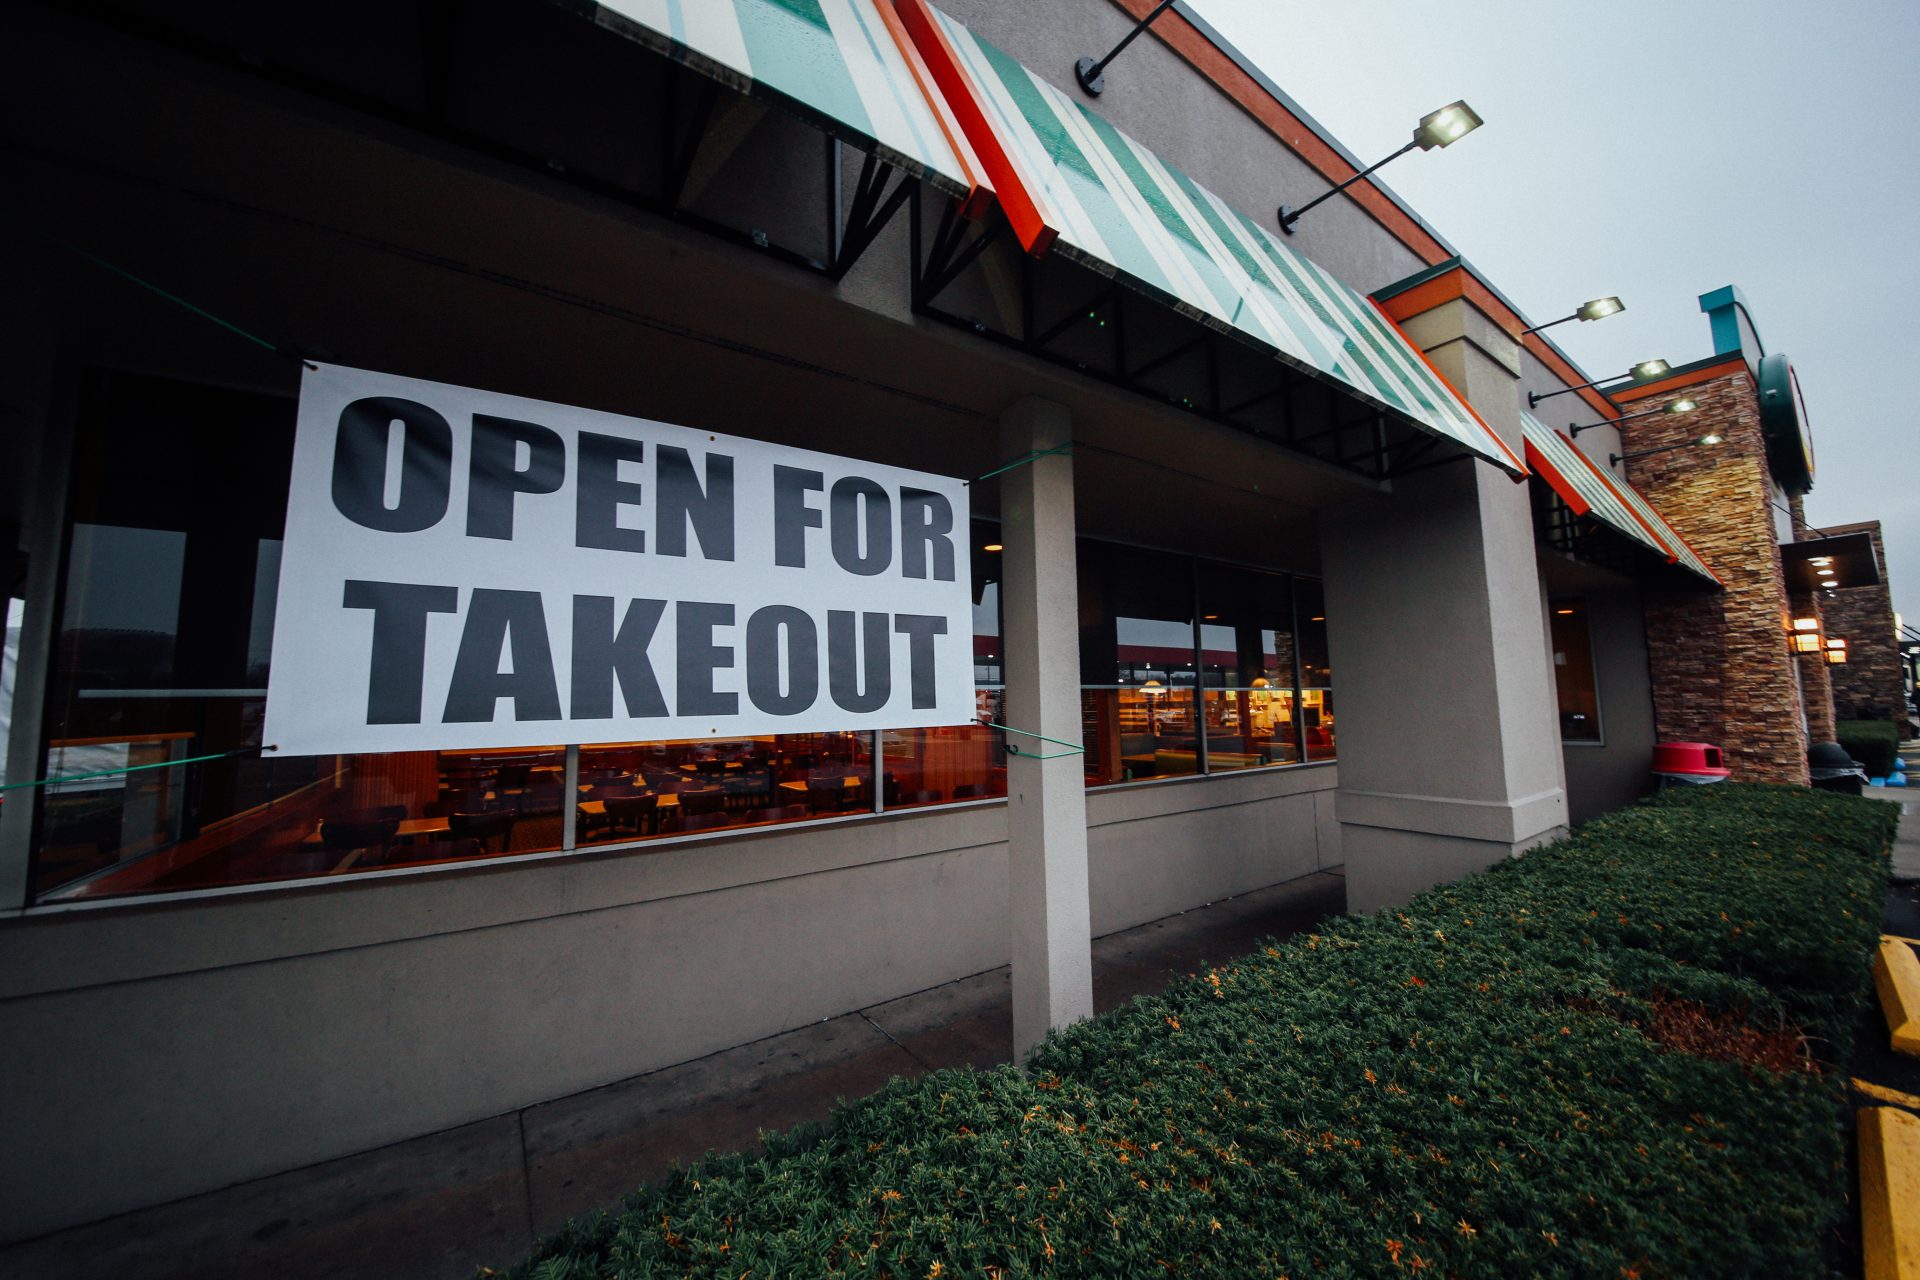 A takeout sign outside of Perkins Restaurant in Manada Hill in the Hershey area.